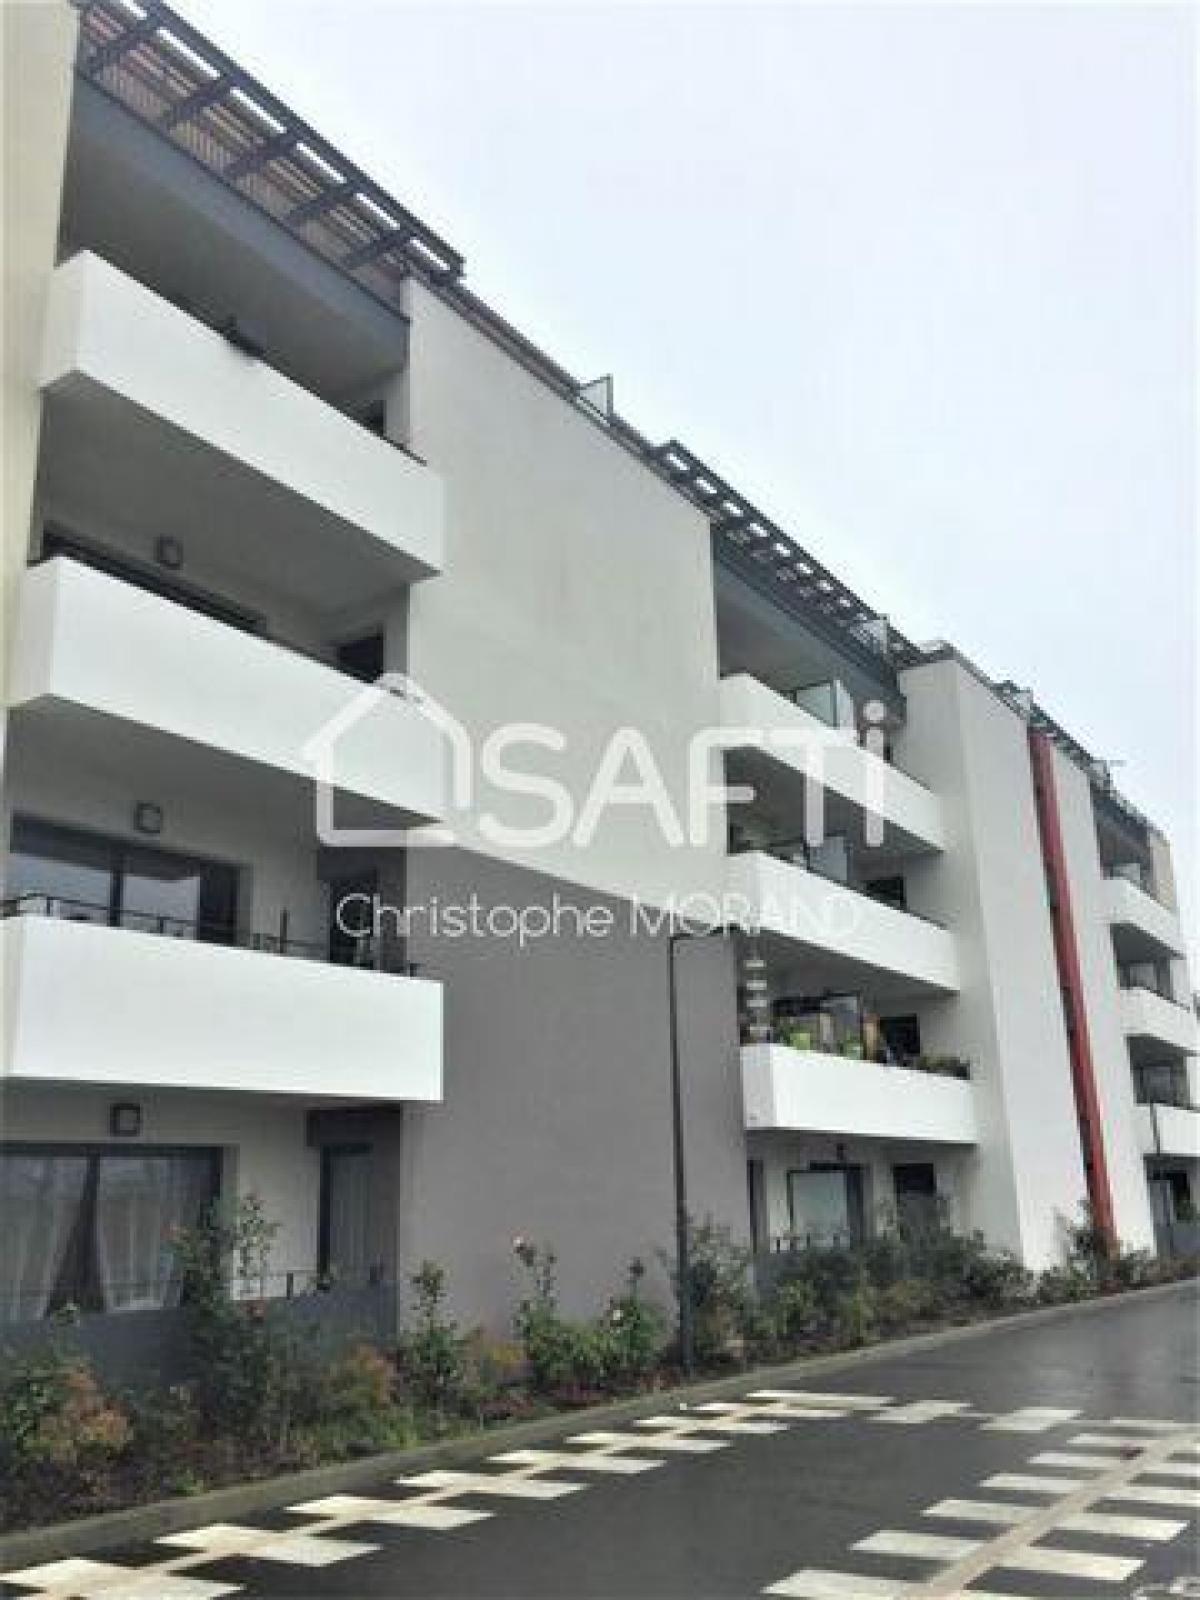 Picture of Apartment For Sale in Merignac, Poitou Charentes, France